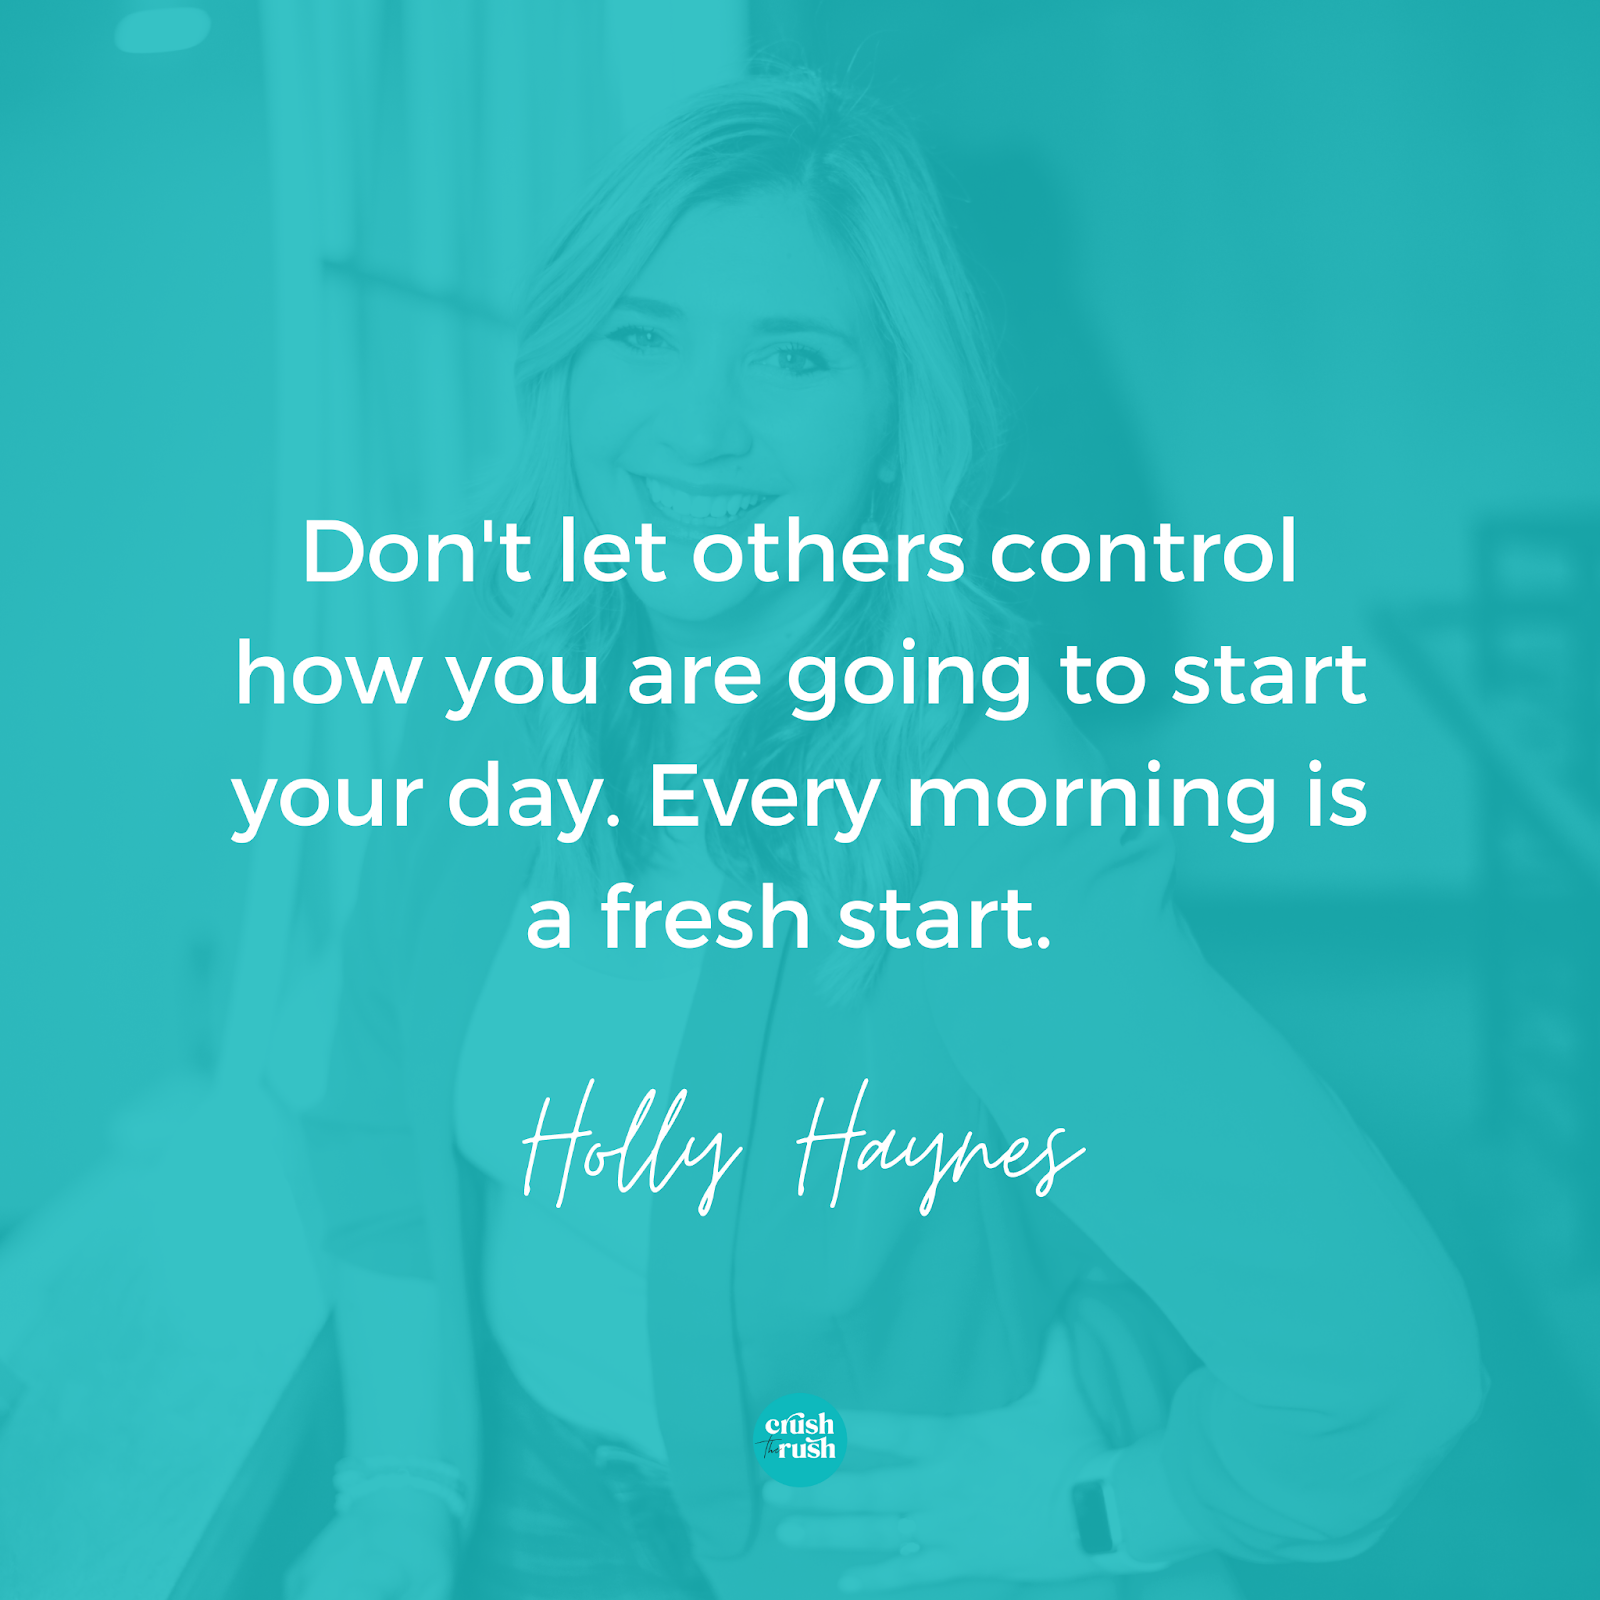 Holly Marie Haynes - Productivity and Business Strategist